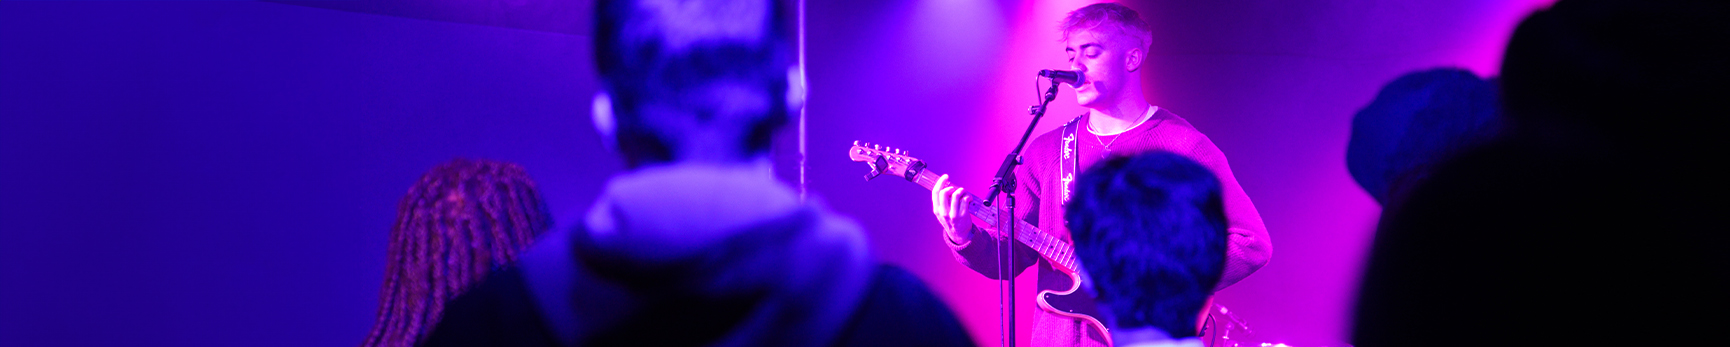 Photograph of a young white male singing into a microphone and playing a guitar with an audience in a room with pink and purple lighting